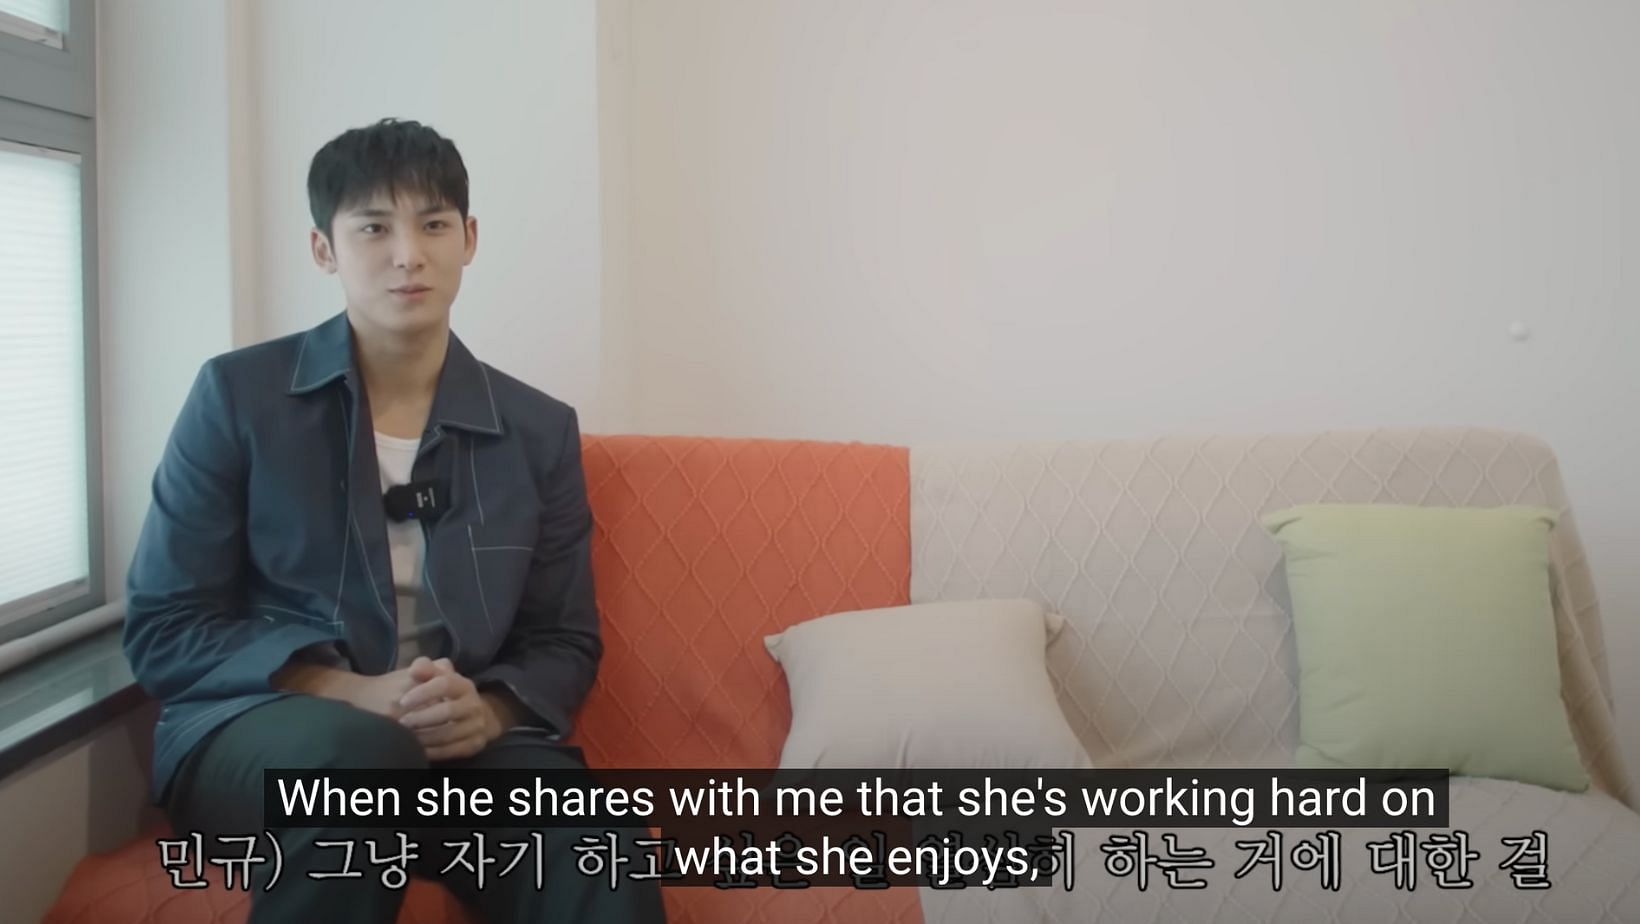 Mingyu shares how he feels happy whenever his sister shares her goals and everyday life with him. (Screenshot via YouTube video/DdeunDdeun)